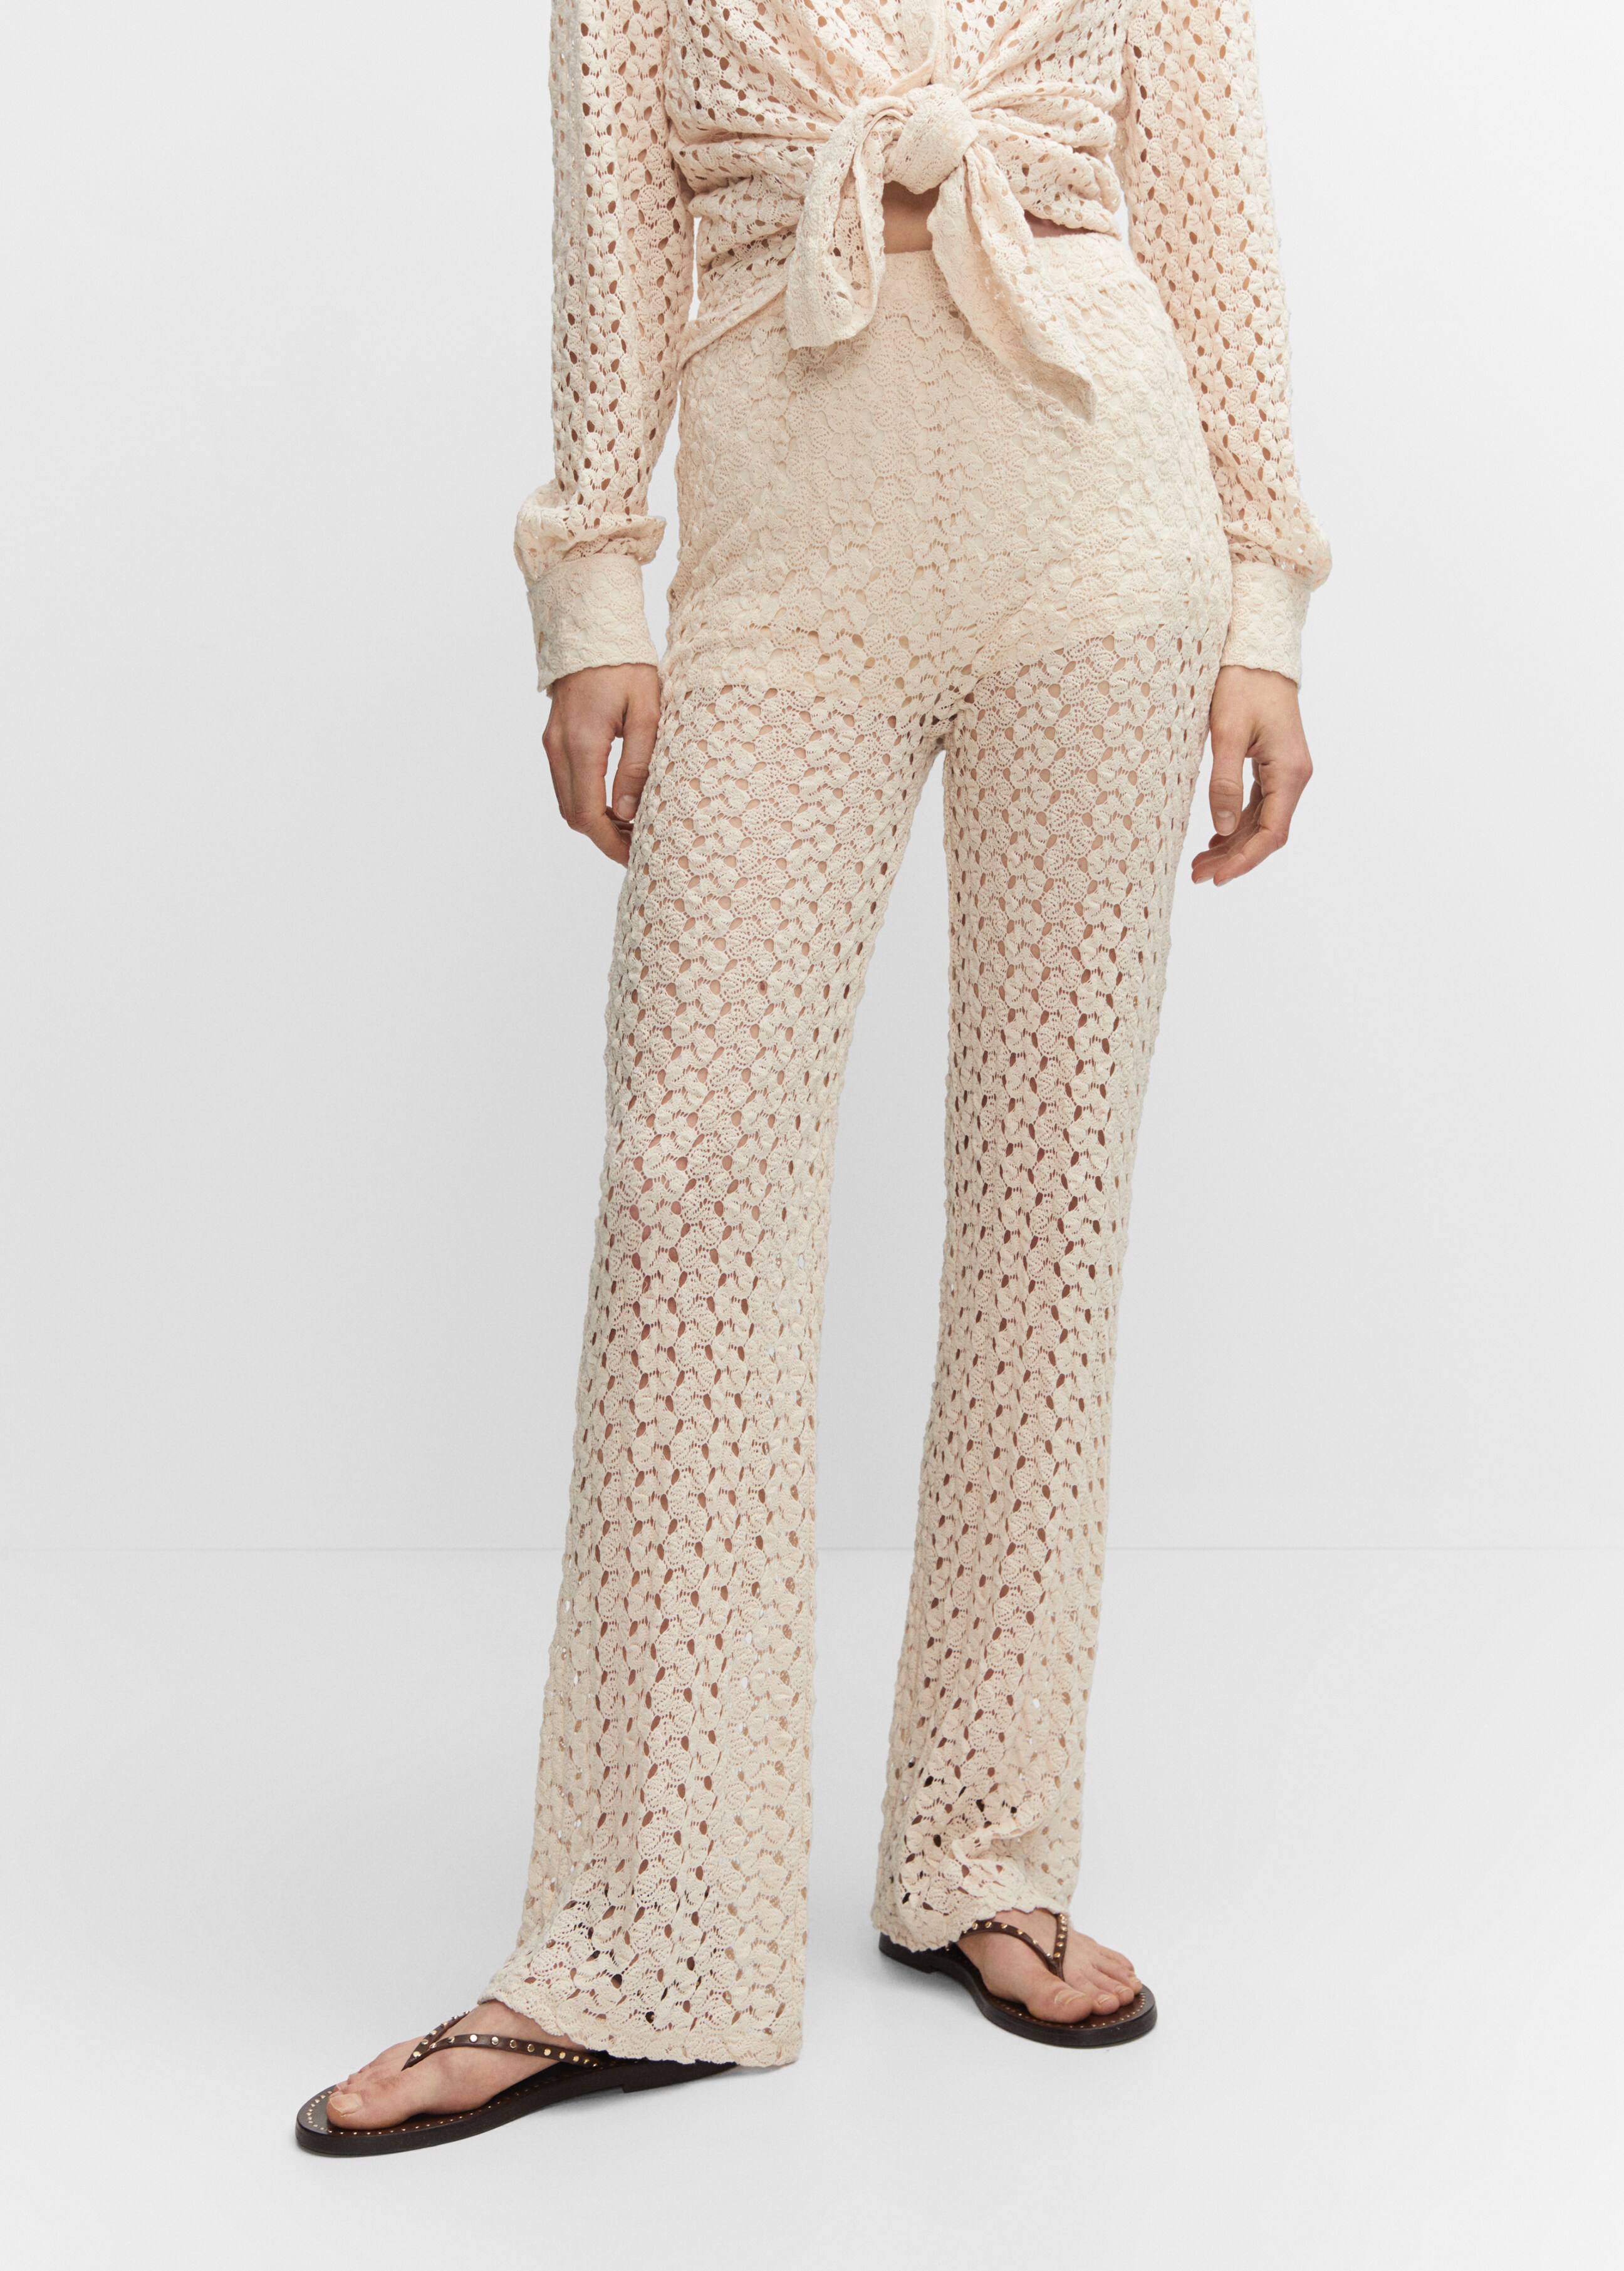 Straight crochet pants - Details of the article 1